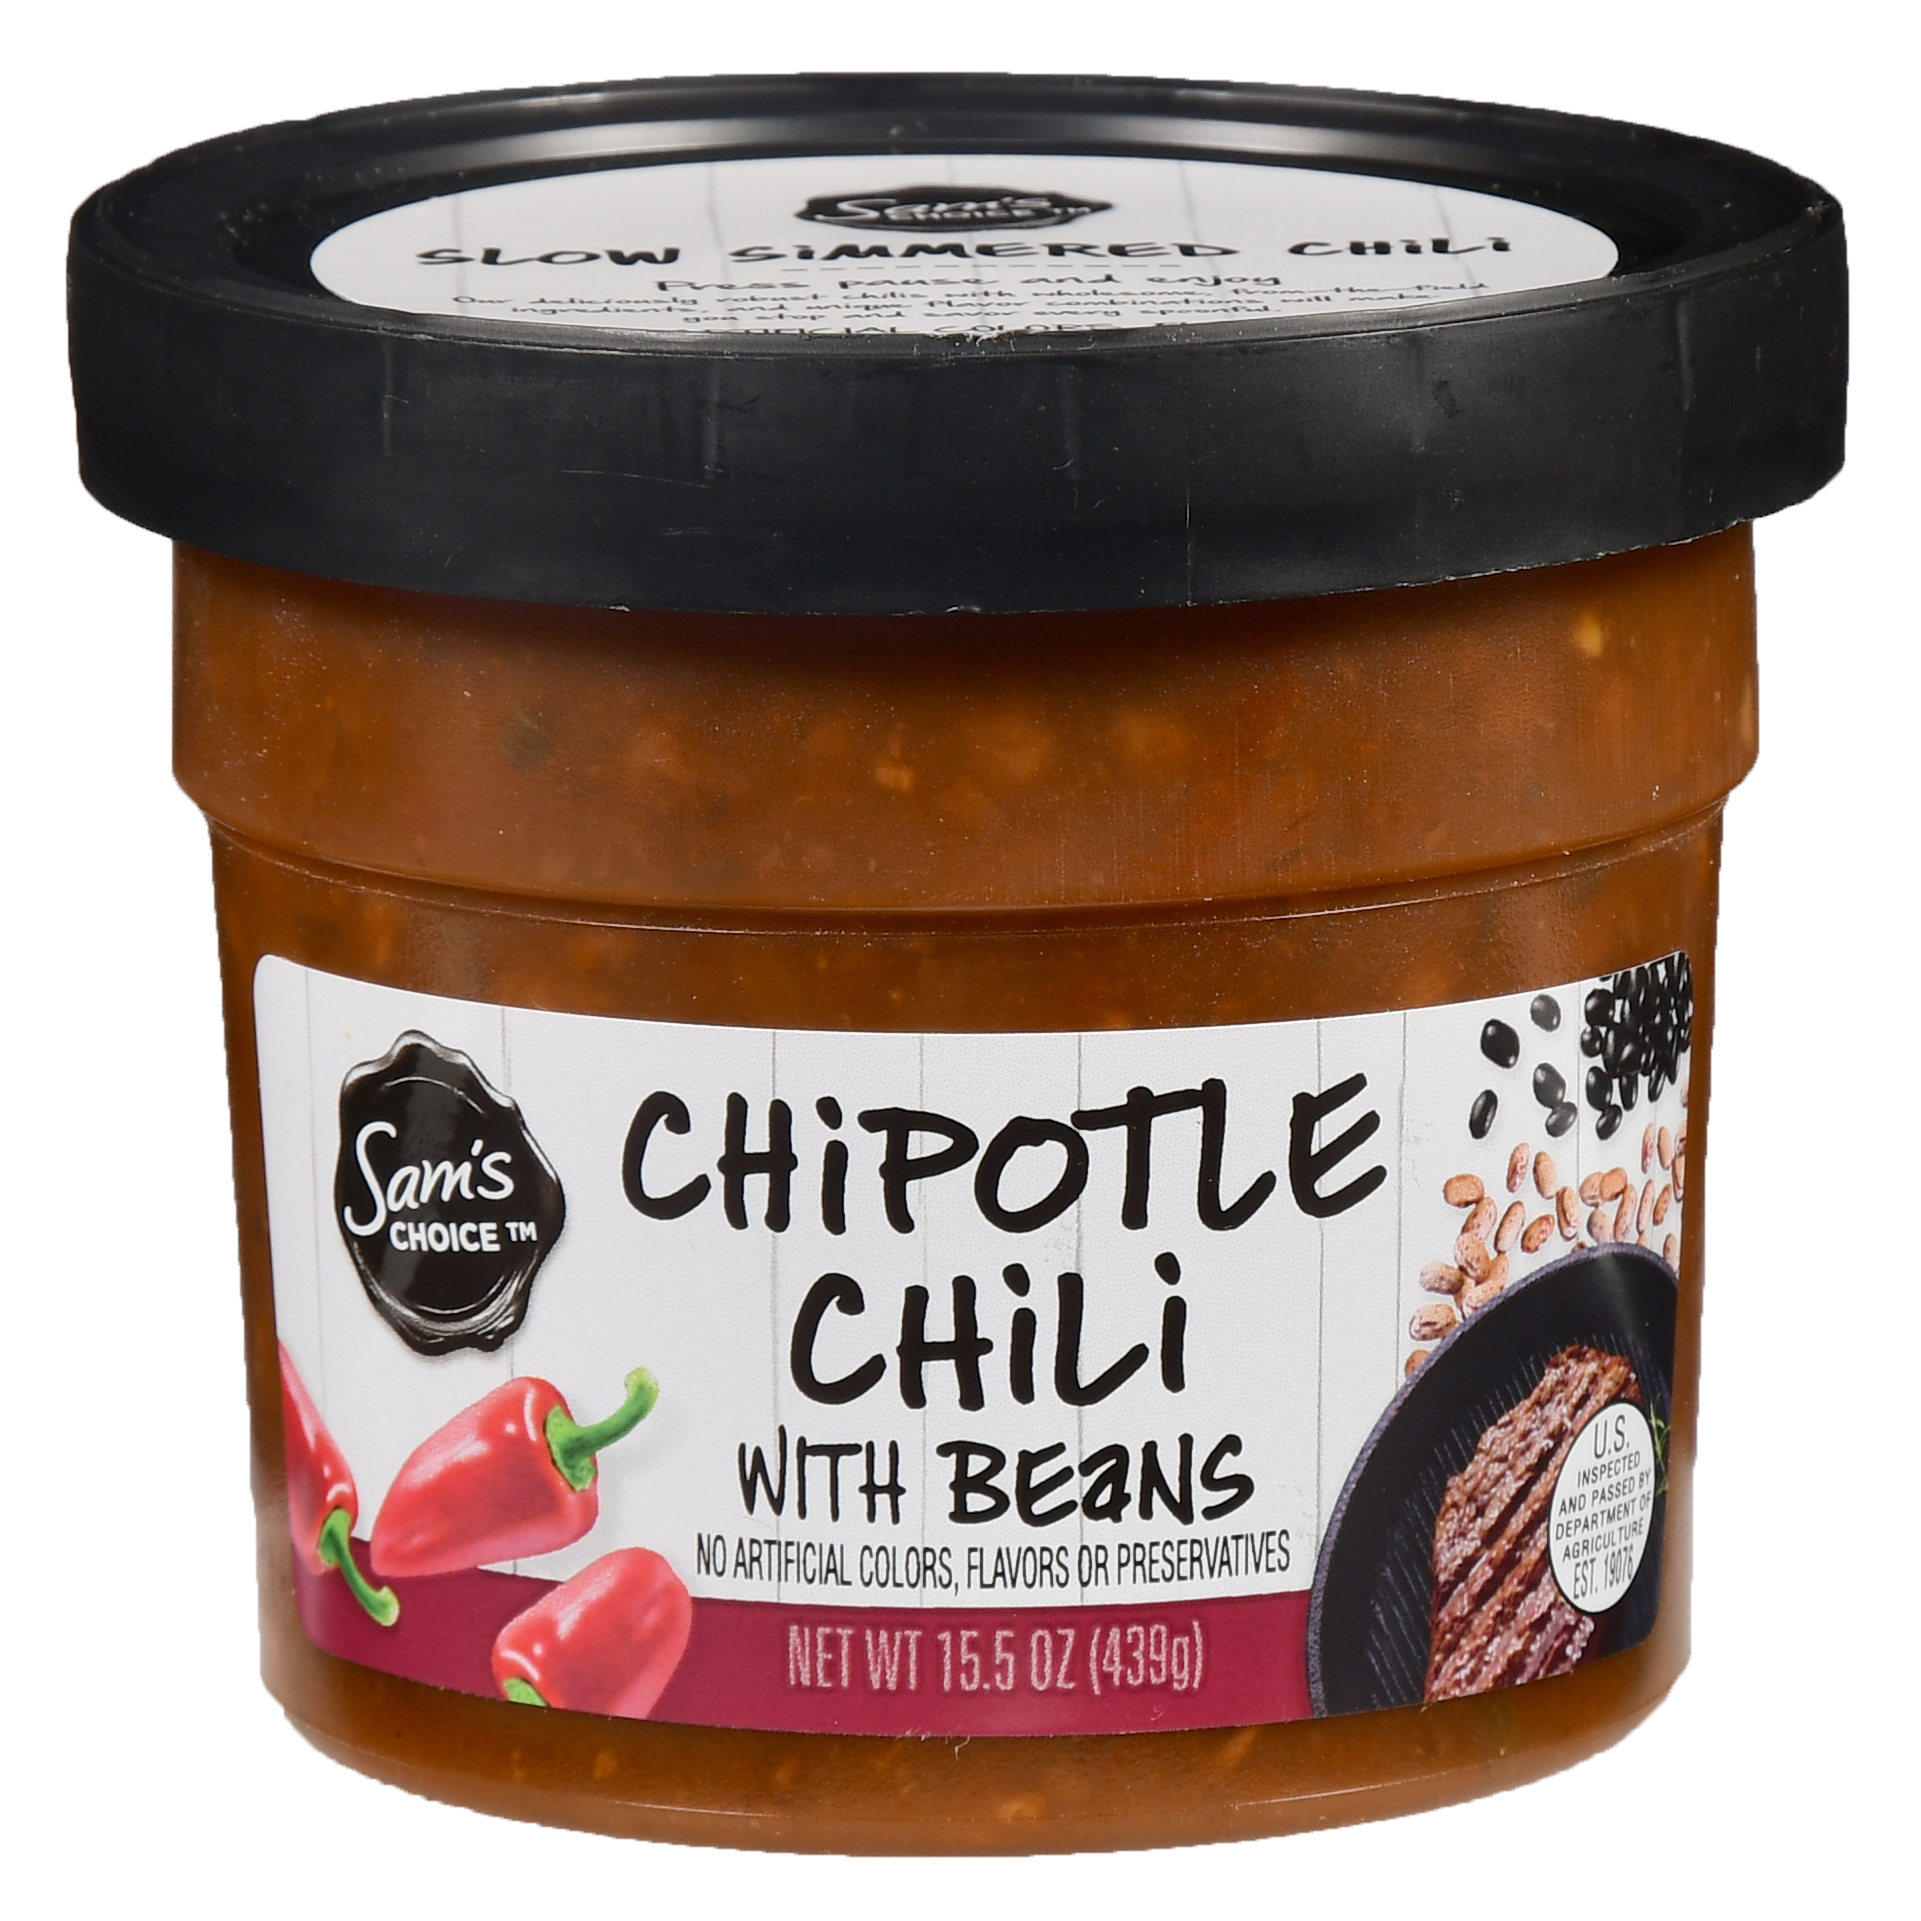 Sam's Choice Chipotle Chili with Beans, 15.5 Oz